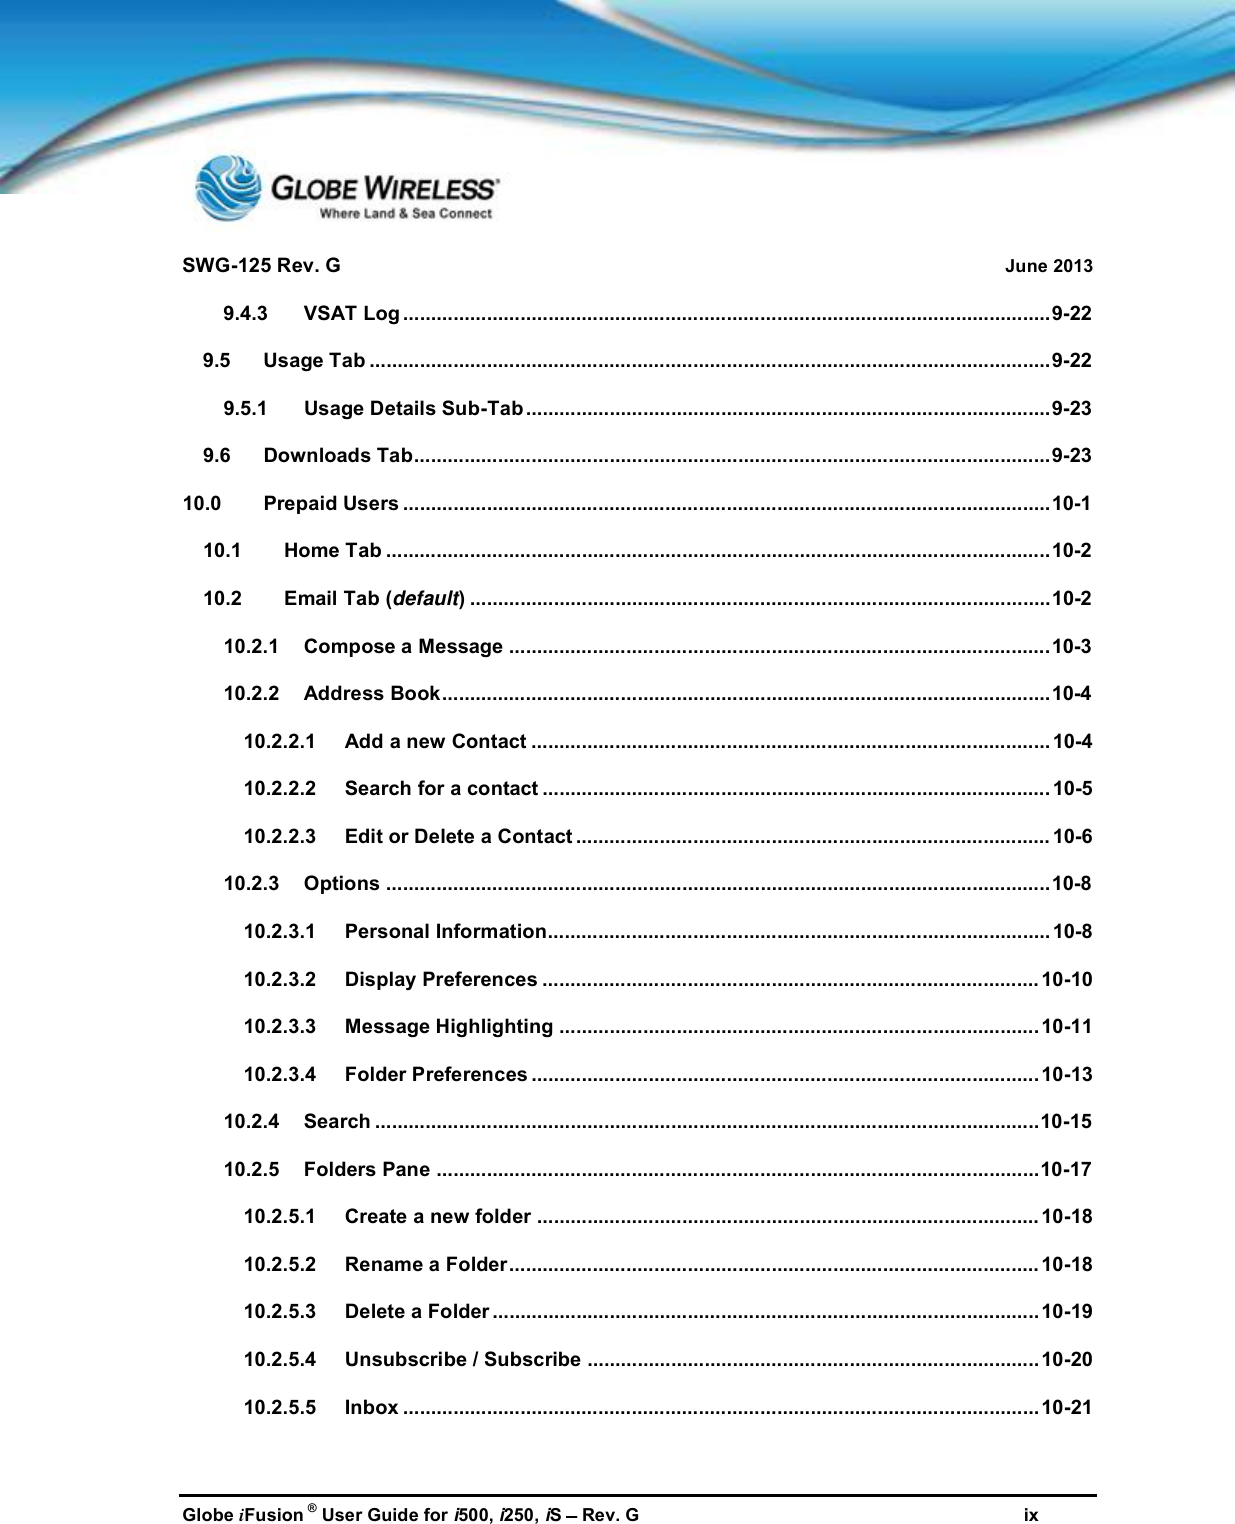 SWG-125 Rev. G June 2013Globe iFusion ®User Guide for i500, i250, iSRev. G ix9.4.3 VSAT Log ....................................................................................................................9-229.5 Usage Tab ..........................................................................................................................9-229.5.1 Usage Details Sub-Tab ..............................................................................................9-239.6 Downloads Tab..................................................................................................................9-2310.0 Prepaid Users ....................................................................................................................10-110.1 Home Tab .......................................................................................................................10-210.2 Email Tab (default) ........................................................................................................10-210.2.1 Compose a Message .................................................................................................10-310.2.2 Address Book.............................................................................................................10-410.2.2.1 Add a new Contact ............................................................................................. 10-410.2.2.2 Search for a contact ...........................................................................................10-510.2.2.3 Edit or Delete a Contact ..................................................................................... 10-610.2.3 Options .......................................................................................................................10-810.2.3.1 Personal Information.......................................................................................... 10-810.2.3.2 Display Preferences .........................................................................................10-1010.2.3.3 Message Highlighting ......................................................................................10-1110.2.3.4 Folder Preferences ...........................................................................................10-1310.2.4 Search .......................................................................................................................10-1510.2.5 Folders Pane ............................................................................................................10-1710.2.5.1 Create a new folder ..........................................................................................10-1810.2.5.2 Rename a Folder............................................................................................... 10-1810.2.5.3 Delete a Folder ..................................................................................................10-1910.2.5.4 Unsubscribe / Subscribe .................................................................................10-2010.2.5.5 Inbox .................................................................................................................. 10-21